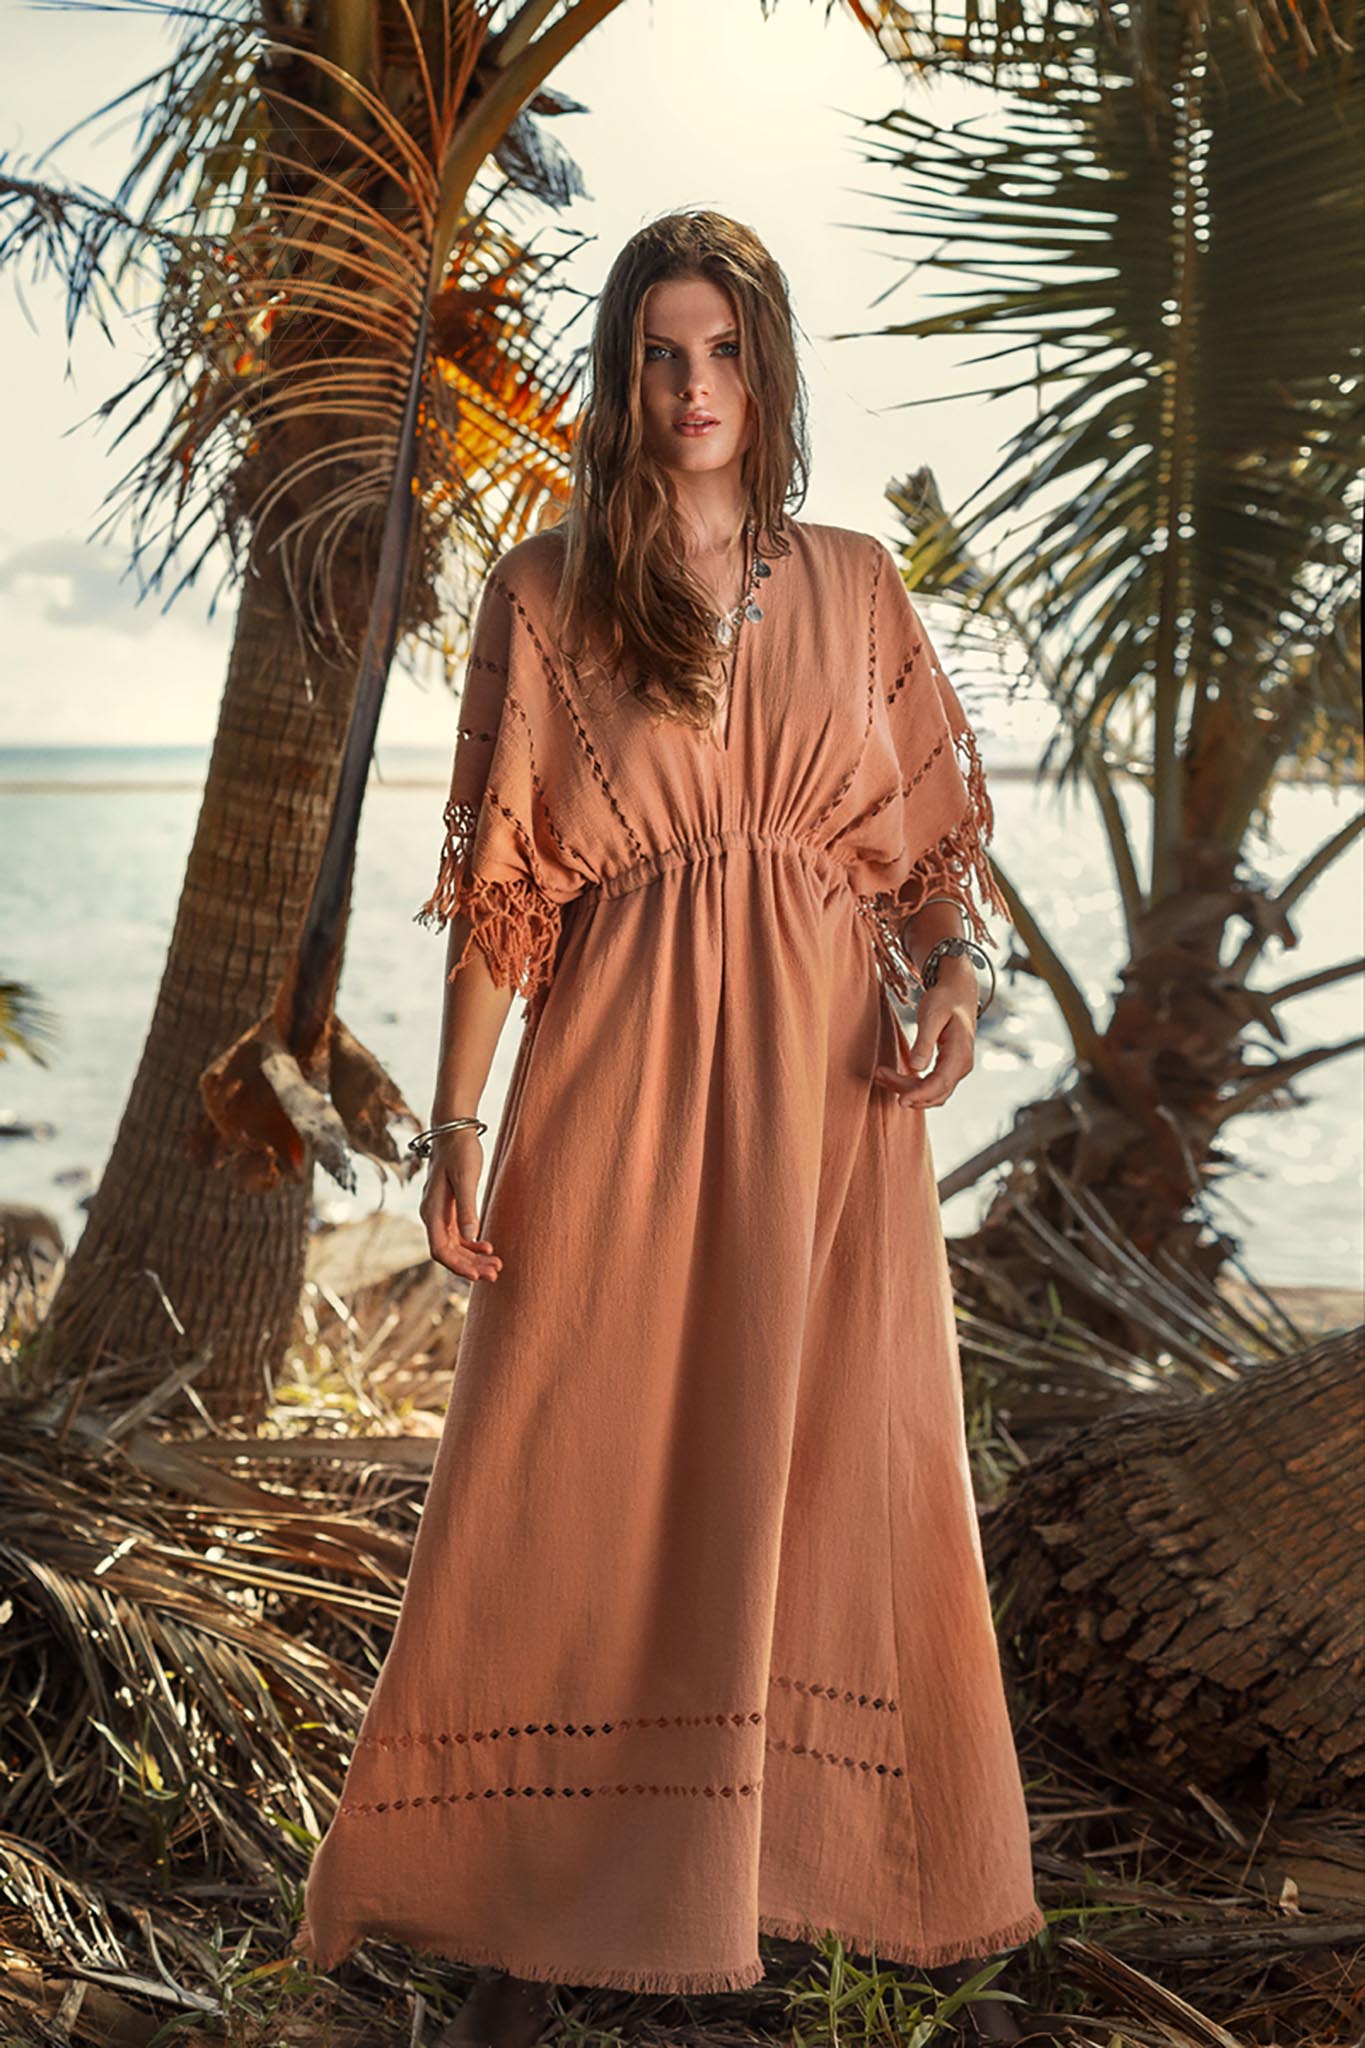 This is a great dress for a summer party. The orange colour is festive and fun, and the light fabric will keep you cool in the heat. 